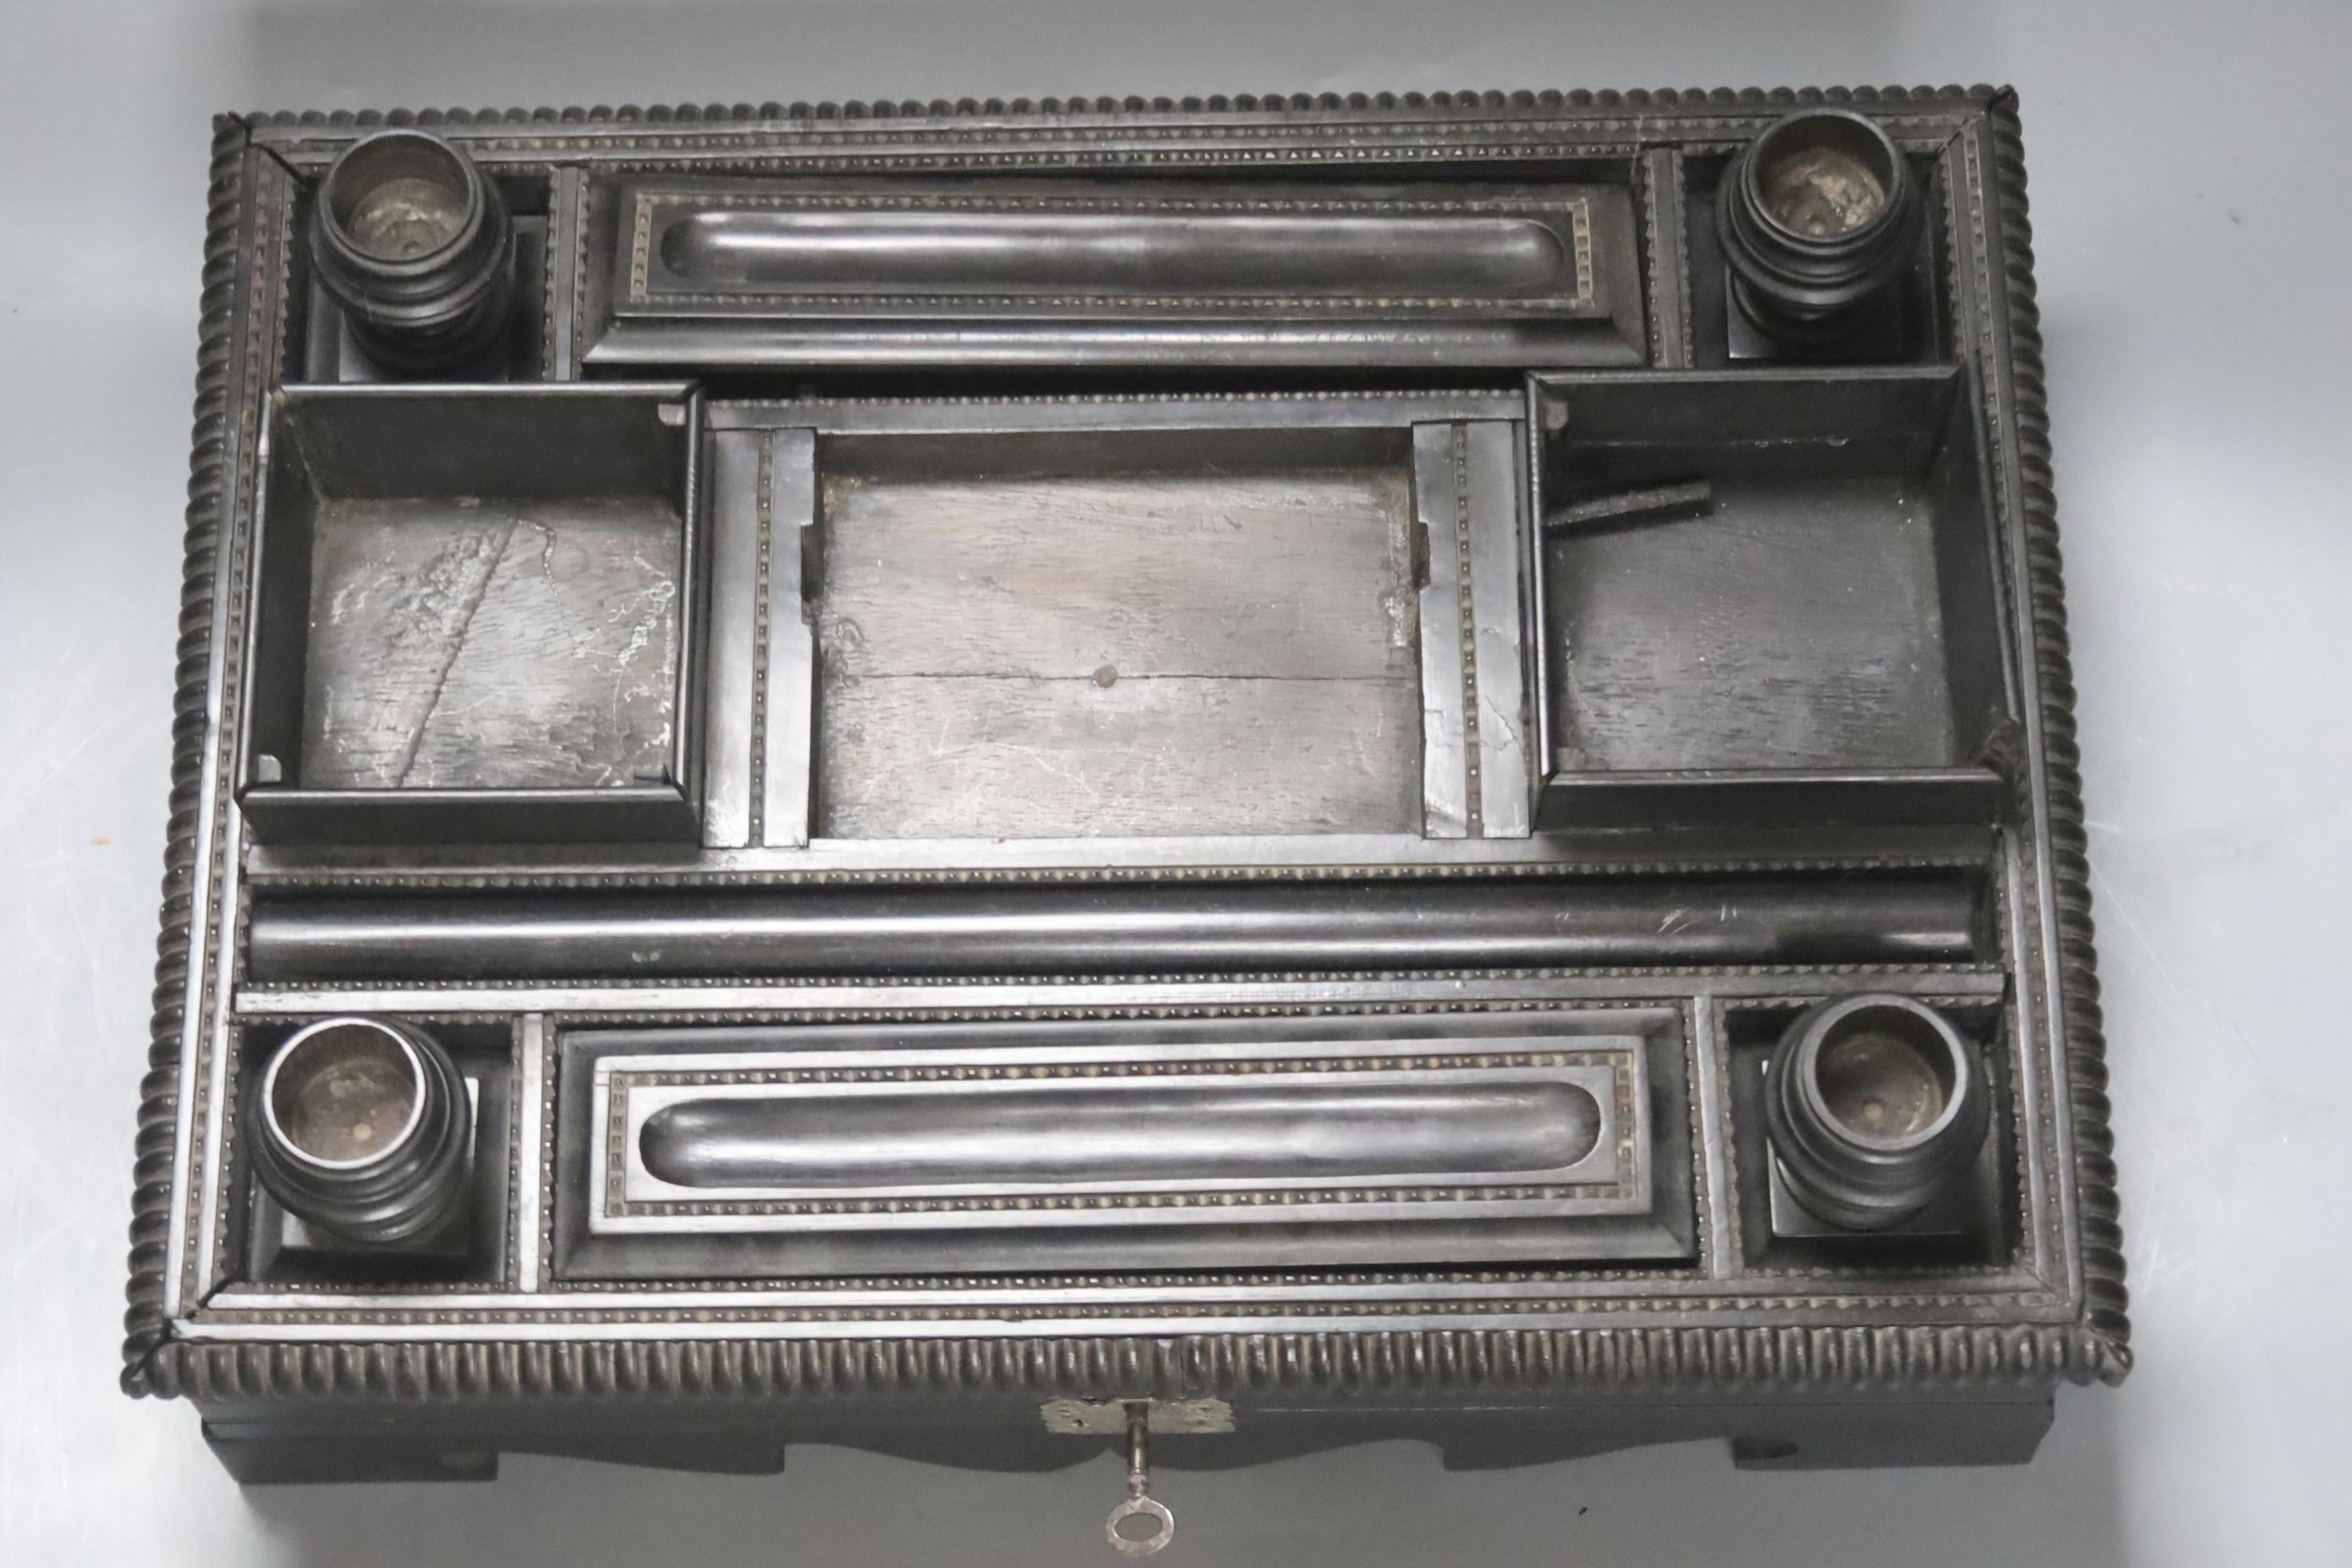 A 19th century Indo-Colonnial ebony desk stand, single drawer with engraved white metal escutcheon, - Image 2 of 2